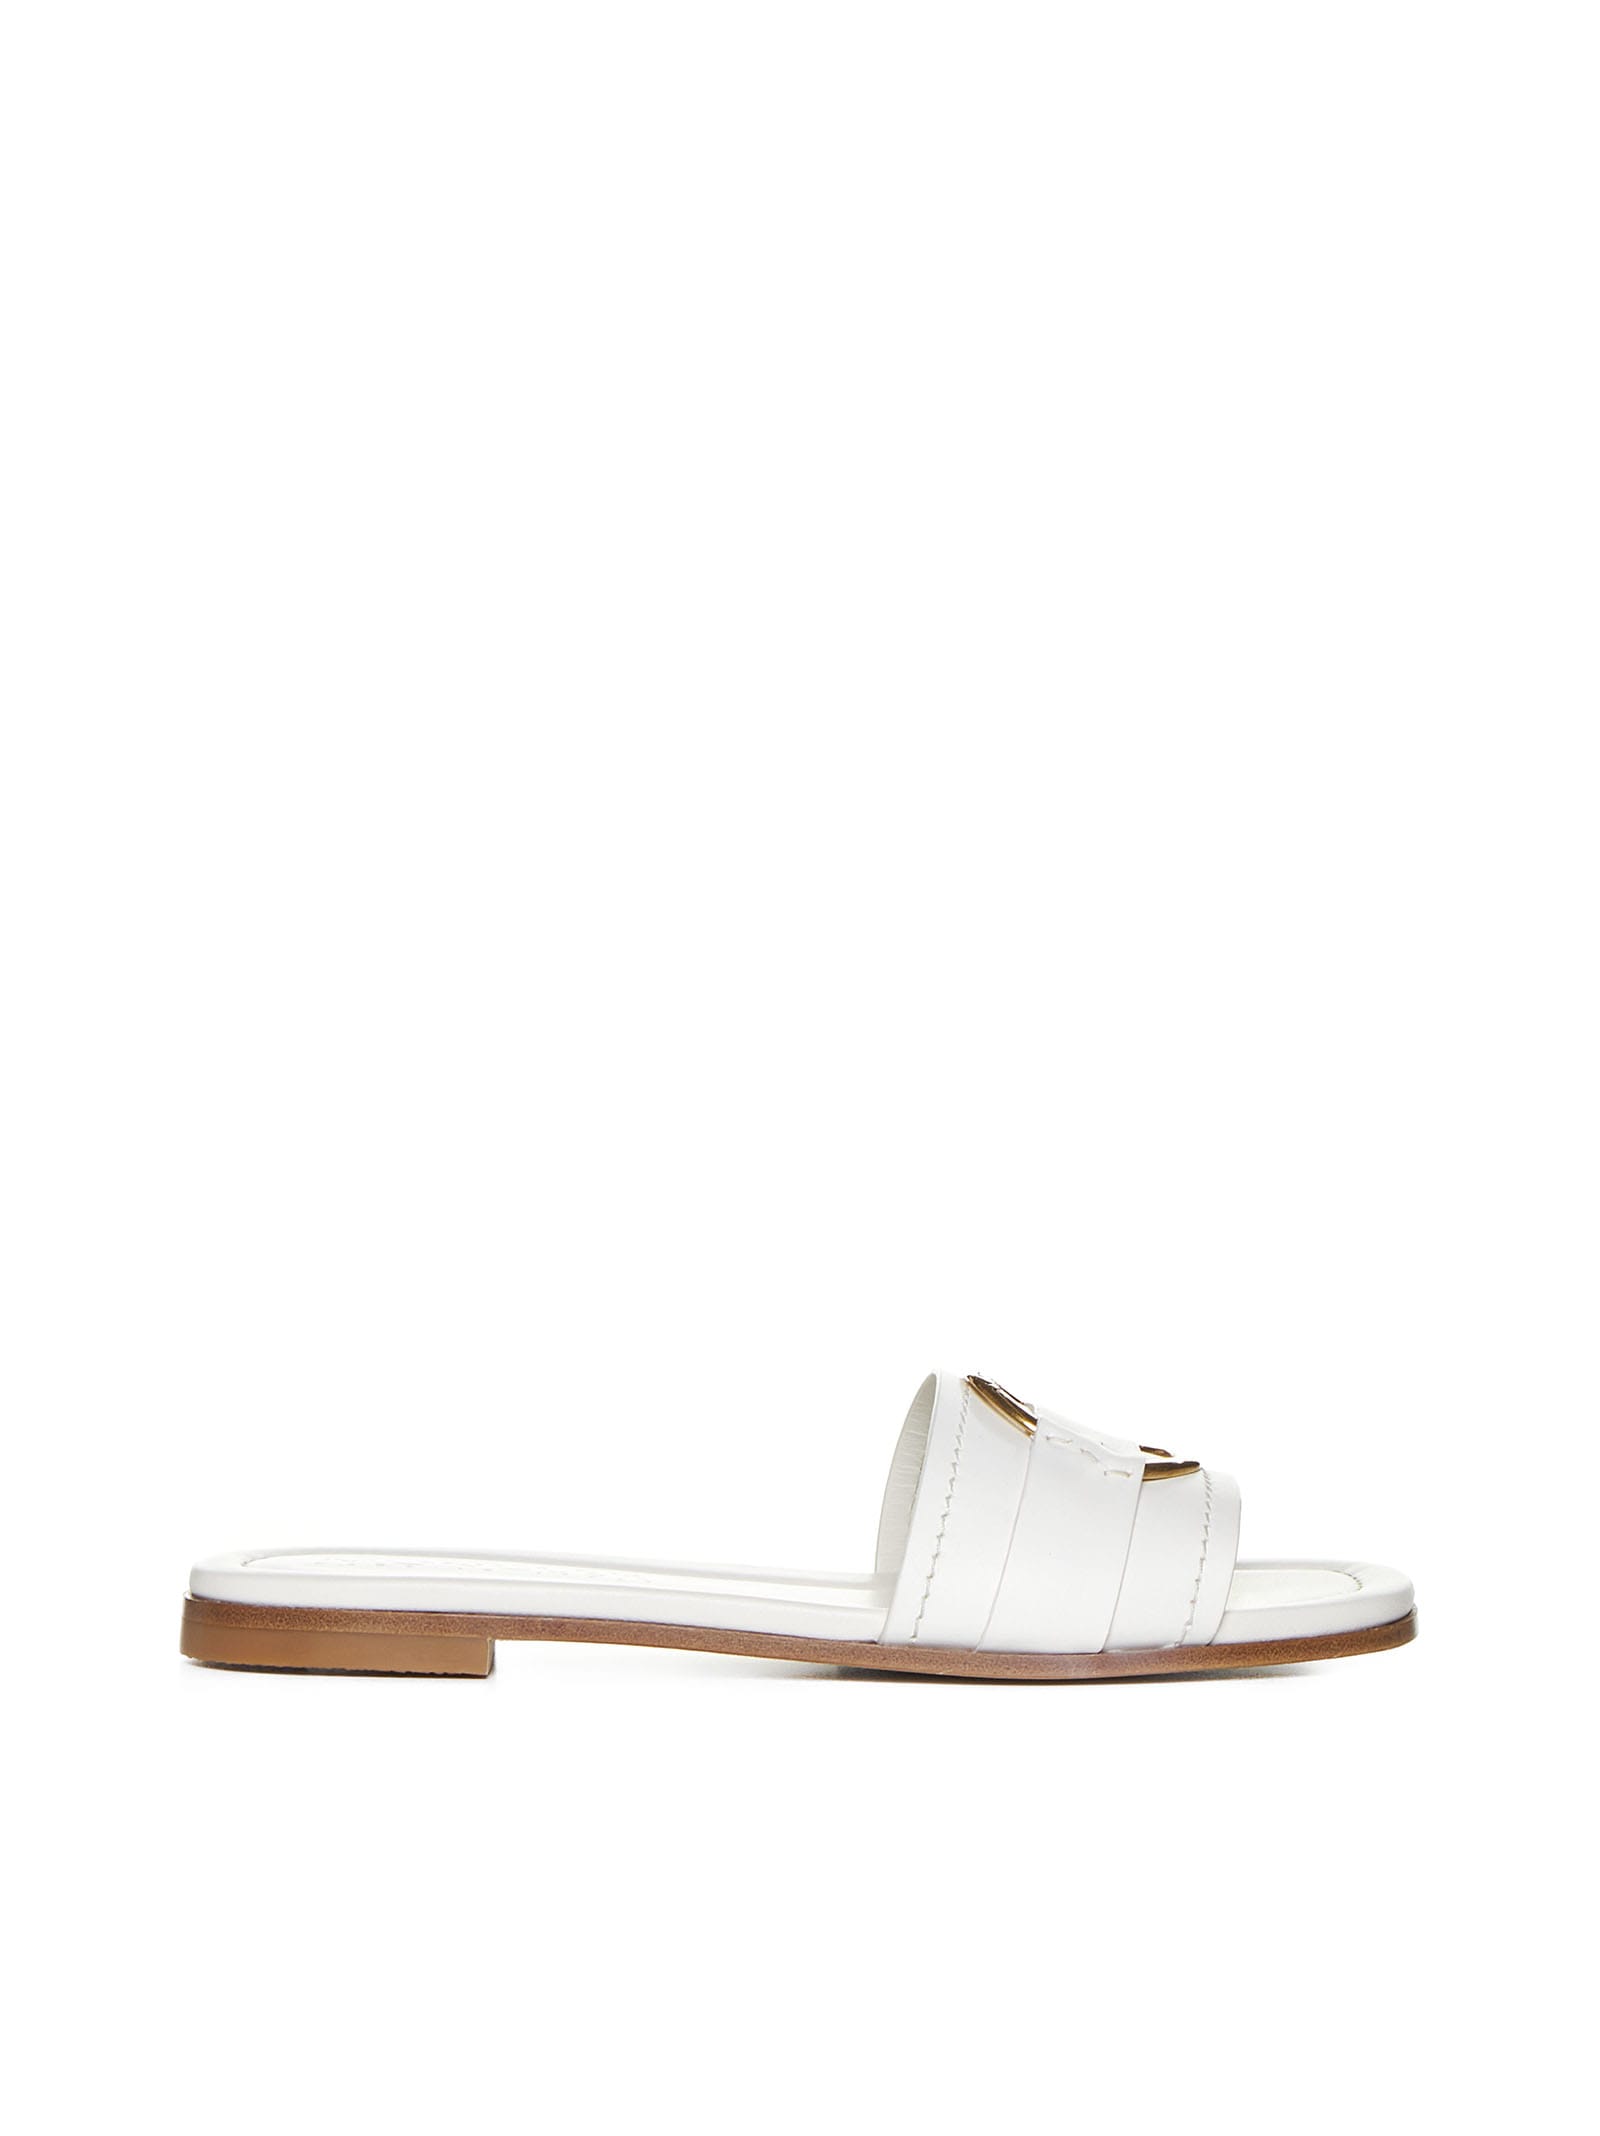 Moncler Sandals In Bianco